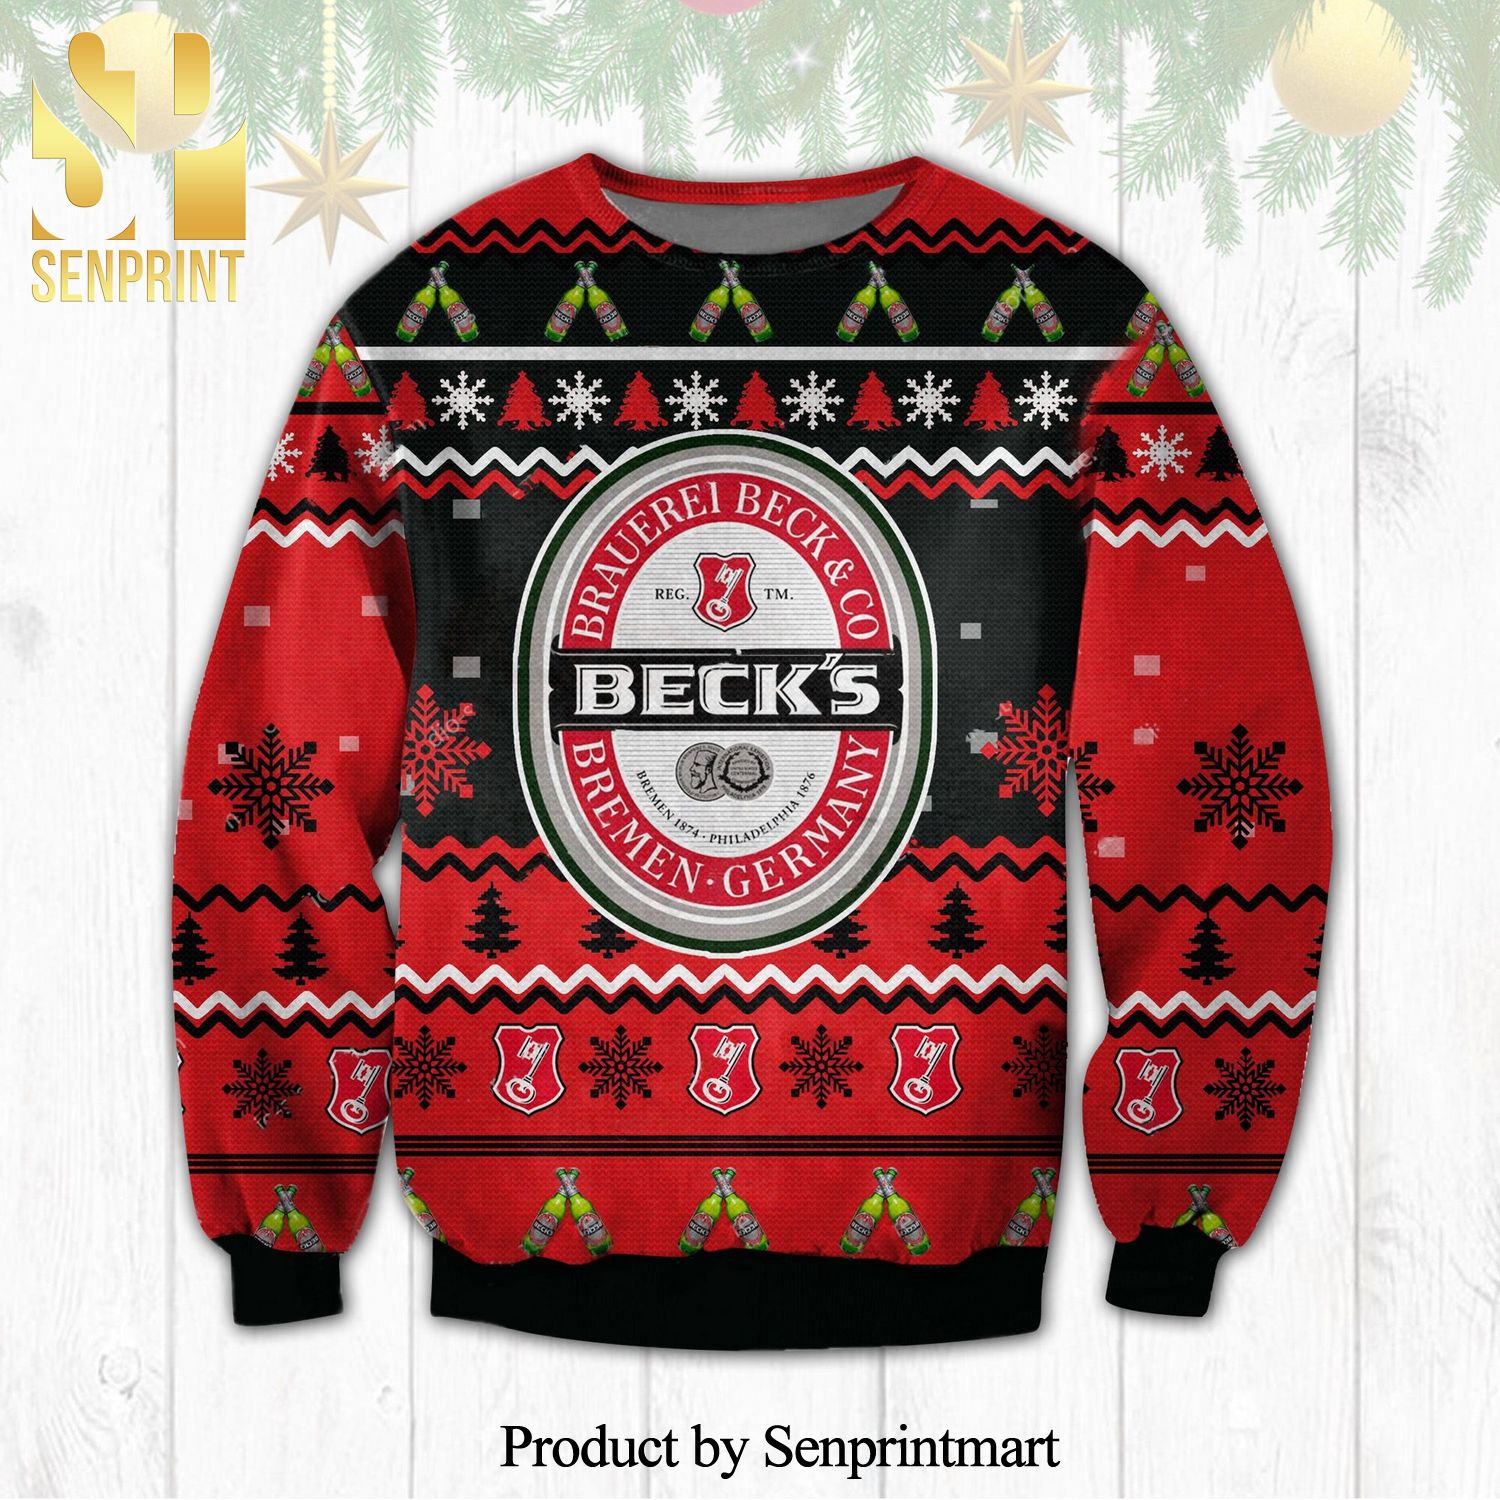 Beck’s Beer Brauerel Beck And Co Knitted Ugly Christmas Sweater